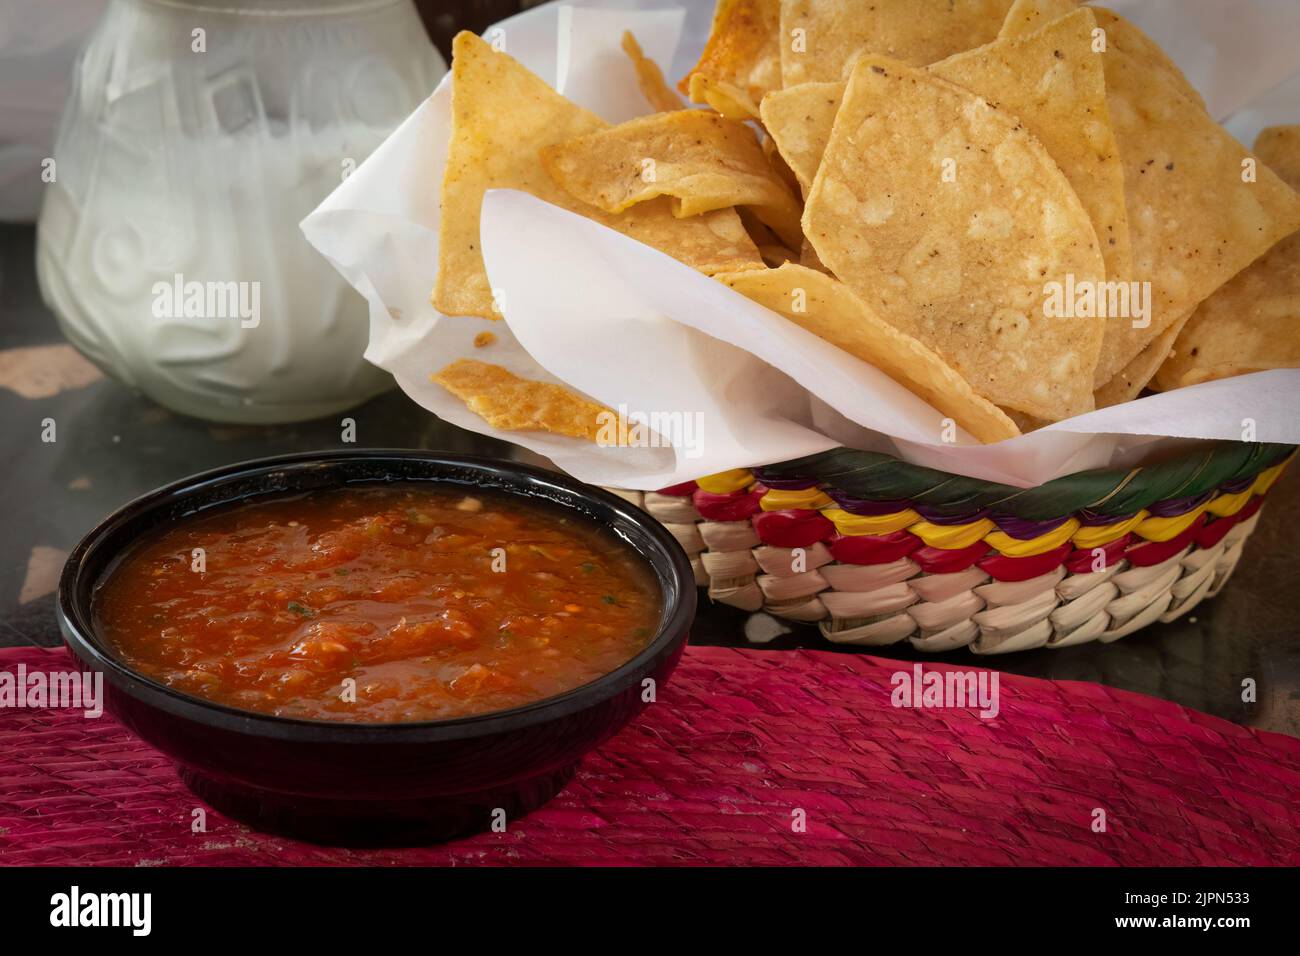 A delicious Mexican appetizer, a large basket of chips and a bowl of salsa sits on a table in San Diego. Stock Photo